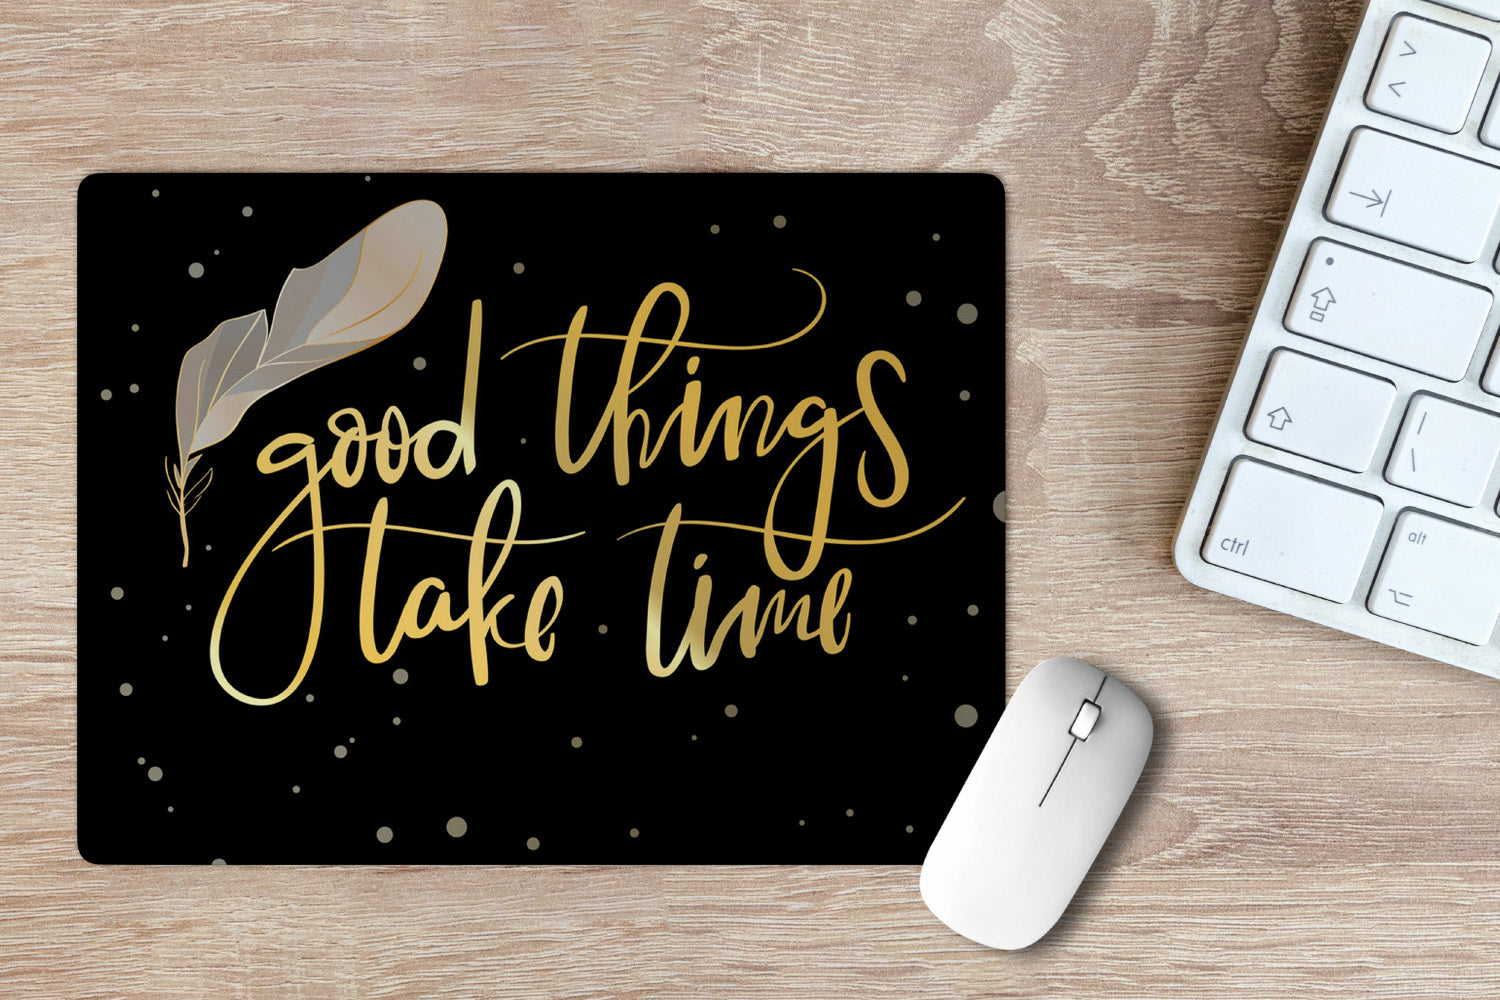 Good things take time ' Printed Non-Slip Rubber Base Mouse Pad for Laptop, PC, Computer.